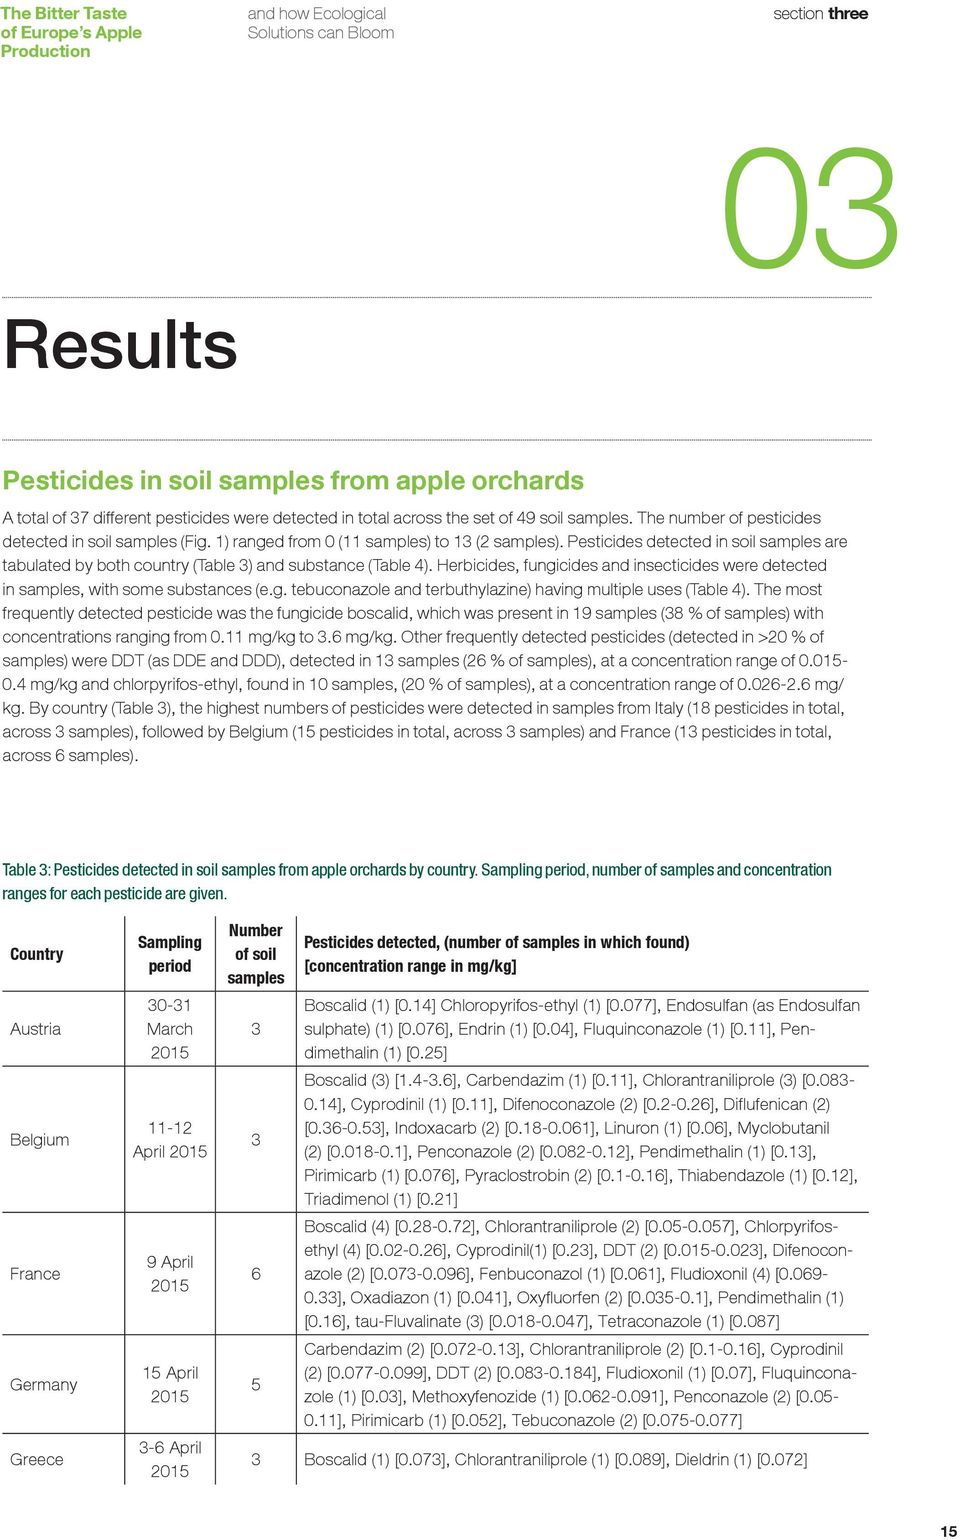 Pesticides detected in soil samples are tabulated by both country (Table 3) and substance (Table 4). Herbicides, fungicides and insecticides were detected in samples, with some substances (e.g. tebuconazole and terbuthylazine) having multiple uses (Table 4).